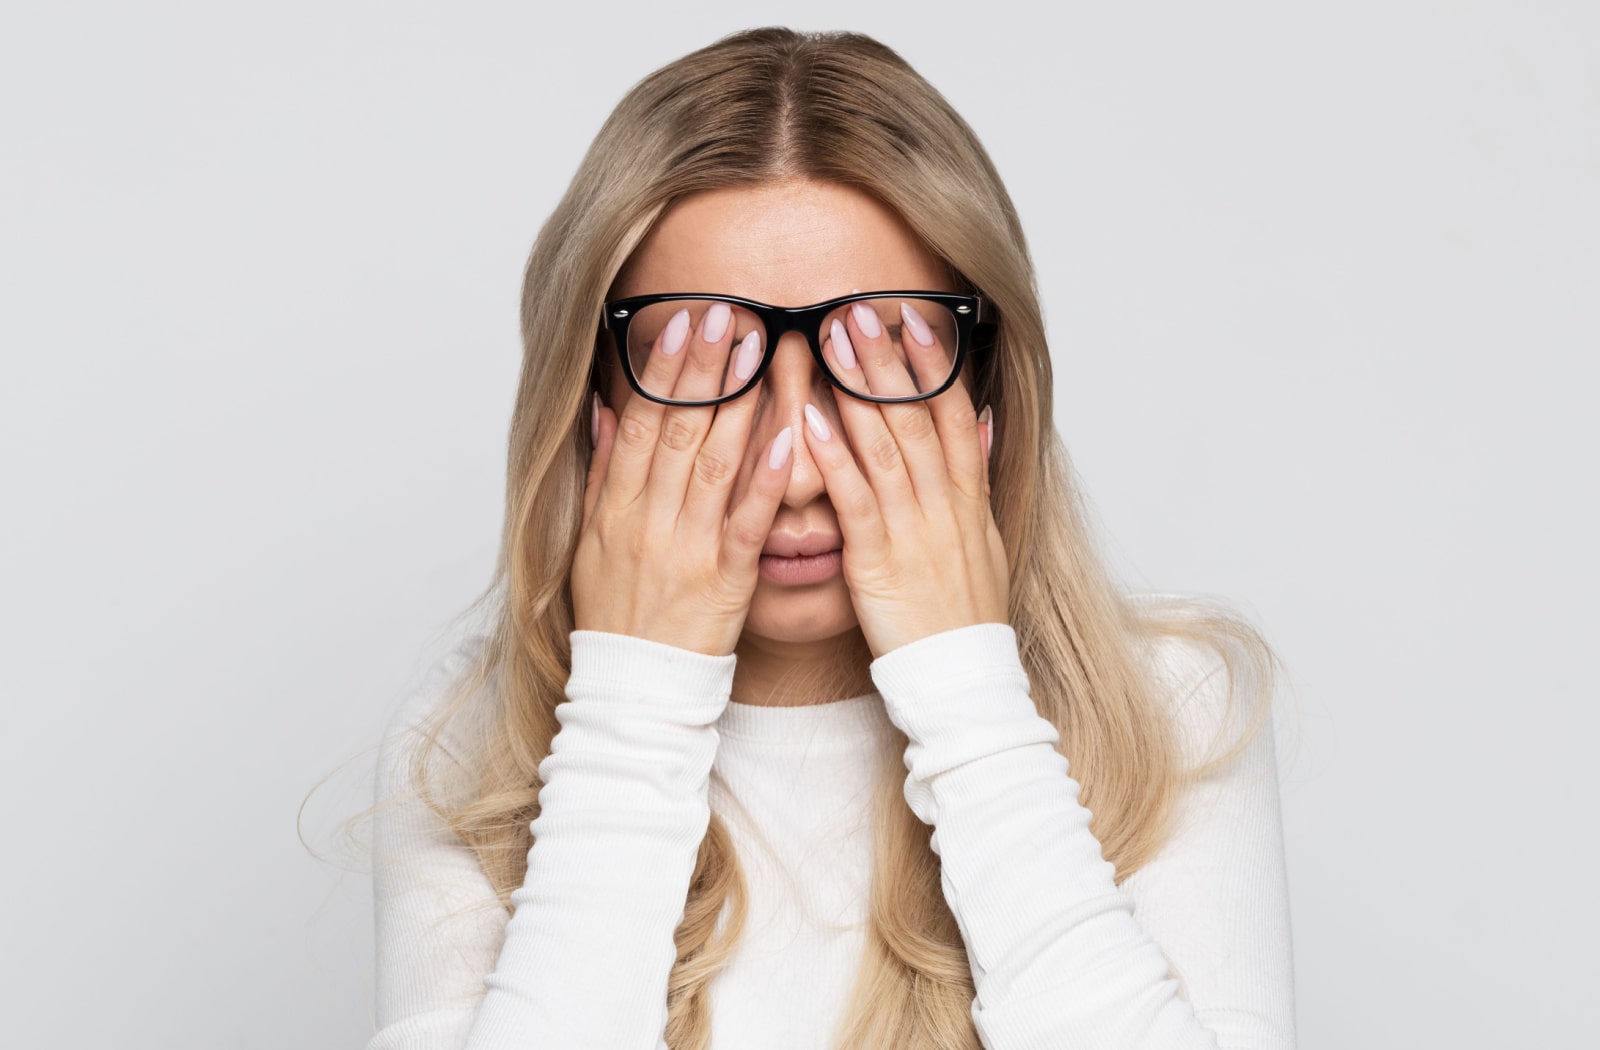 A woman covering her eyes with her hands underneath her glasses